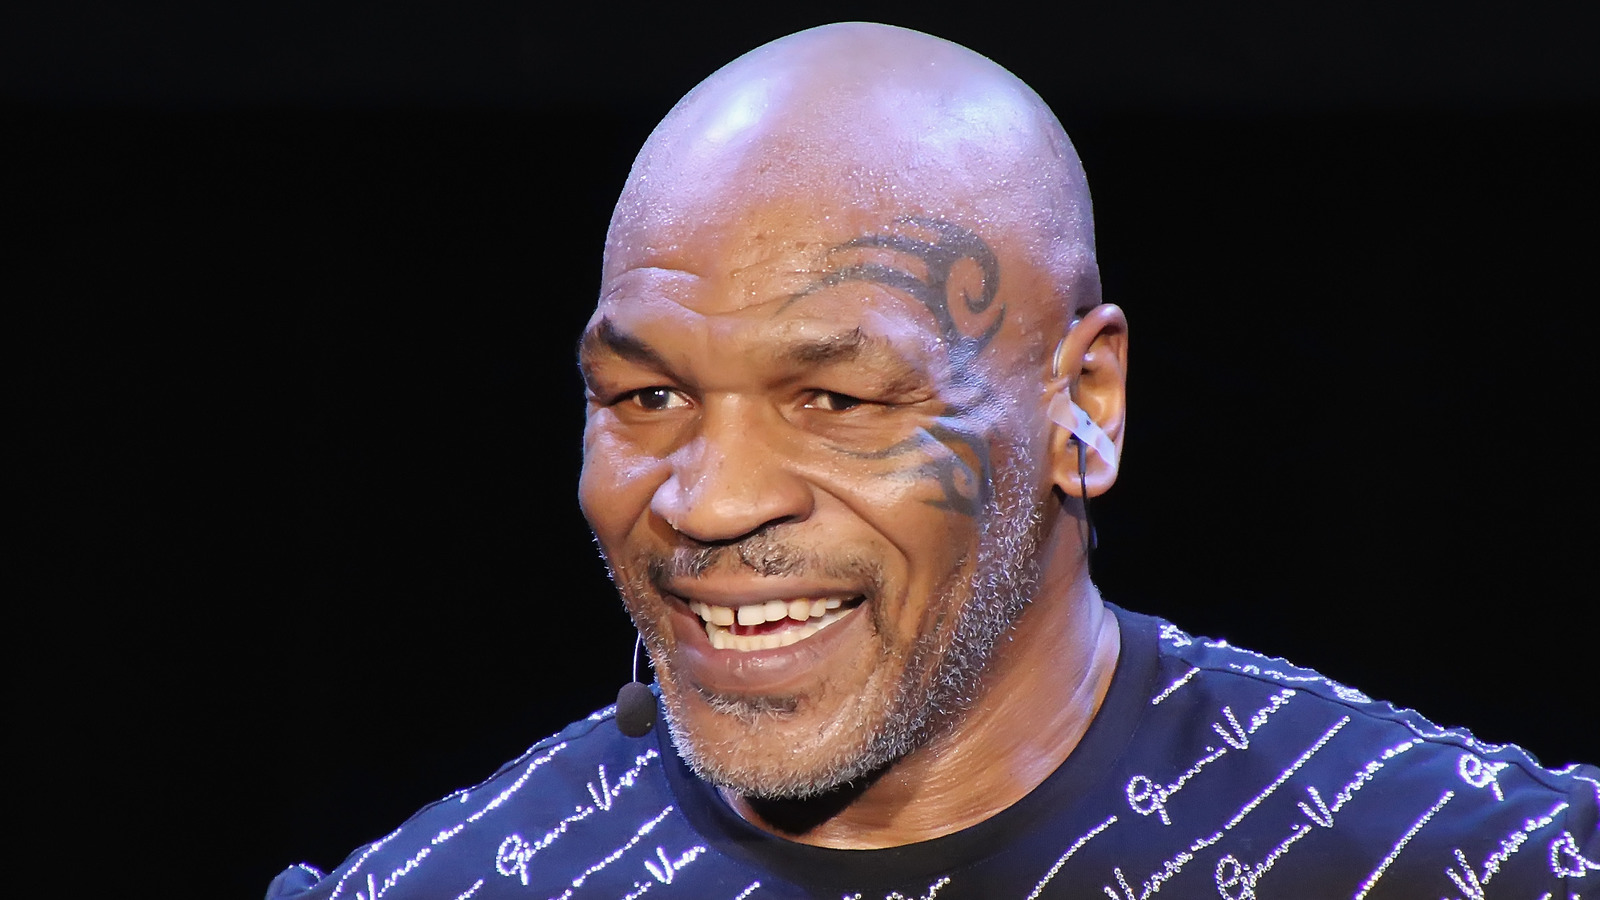 4. Mike Tyson's tattoo removal process - wide 6